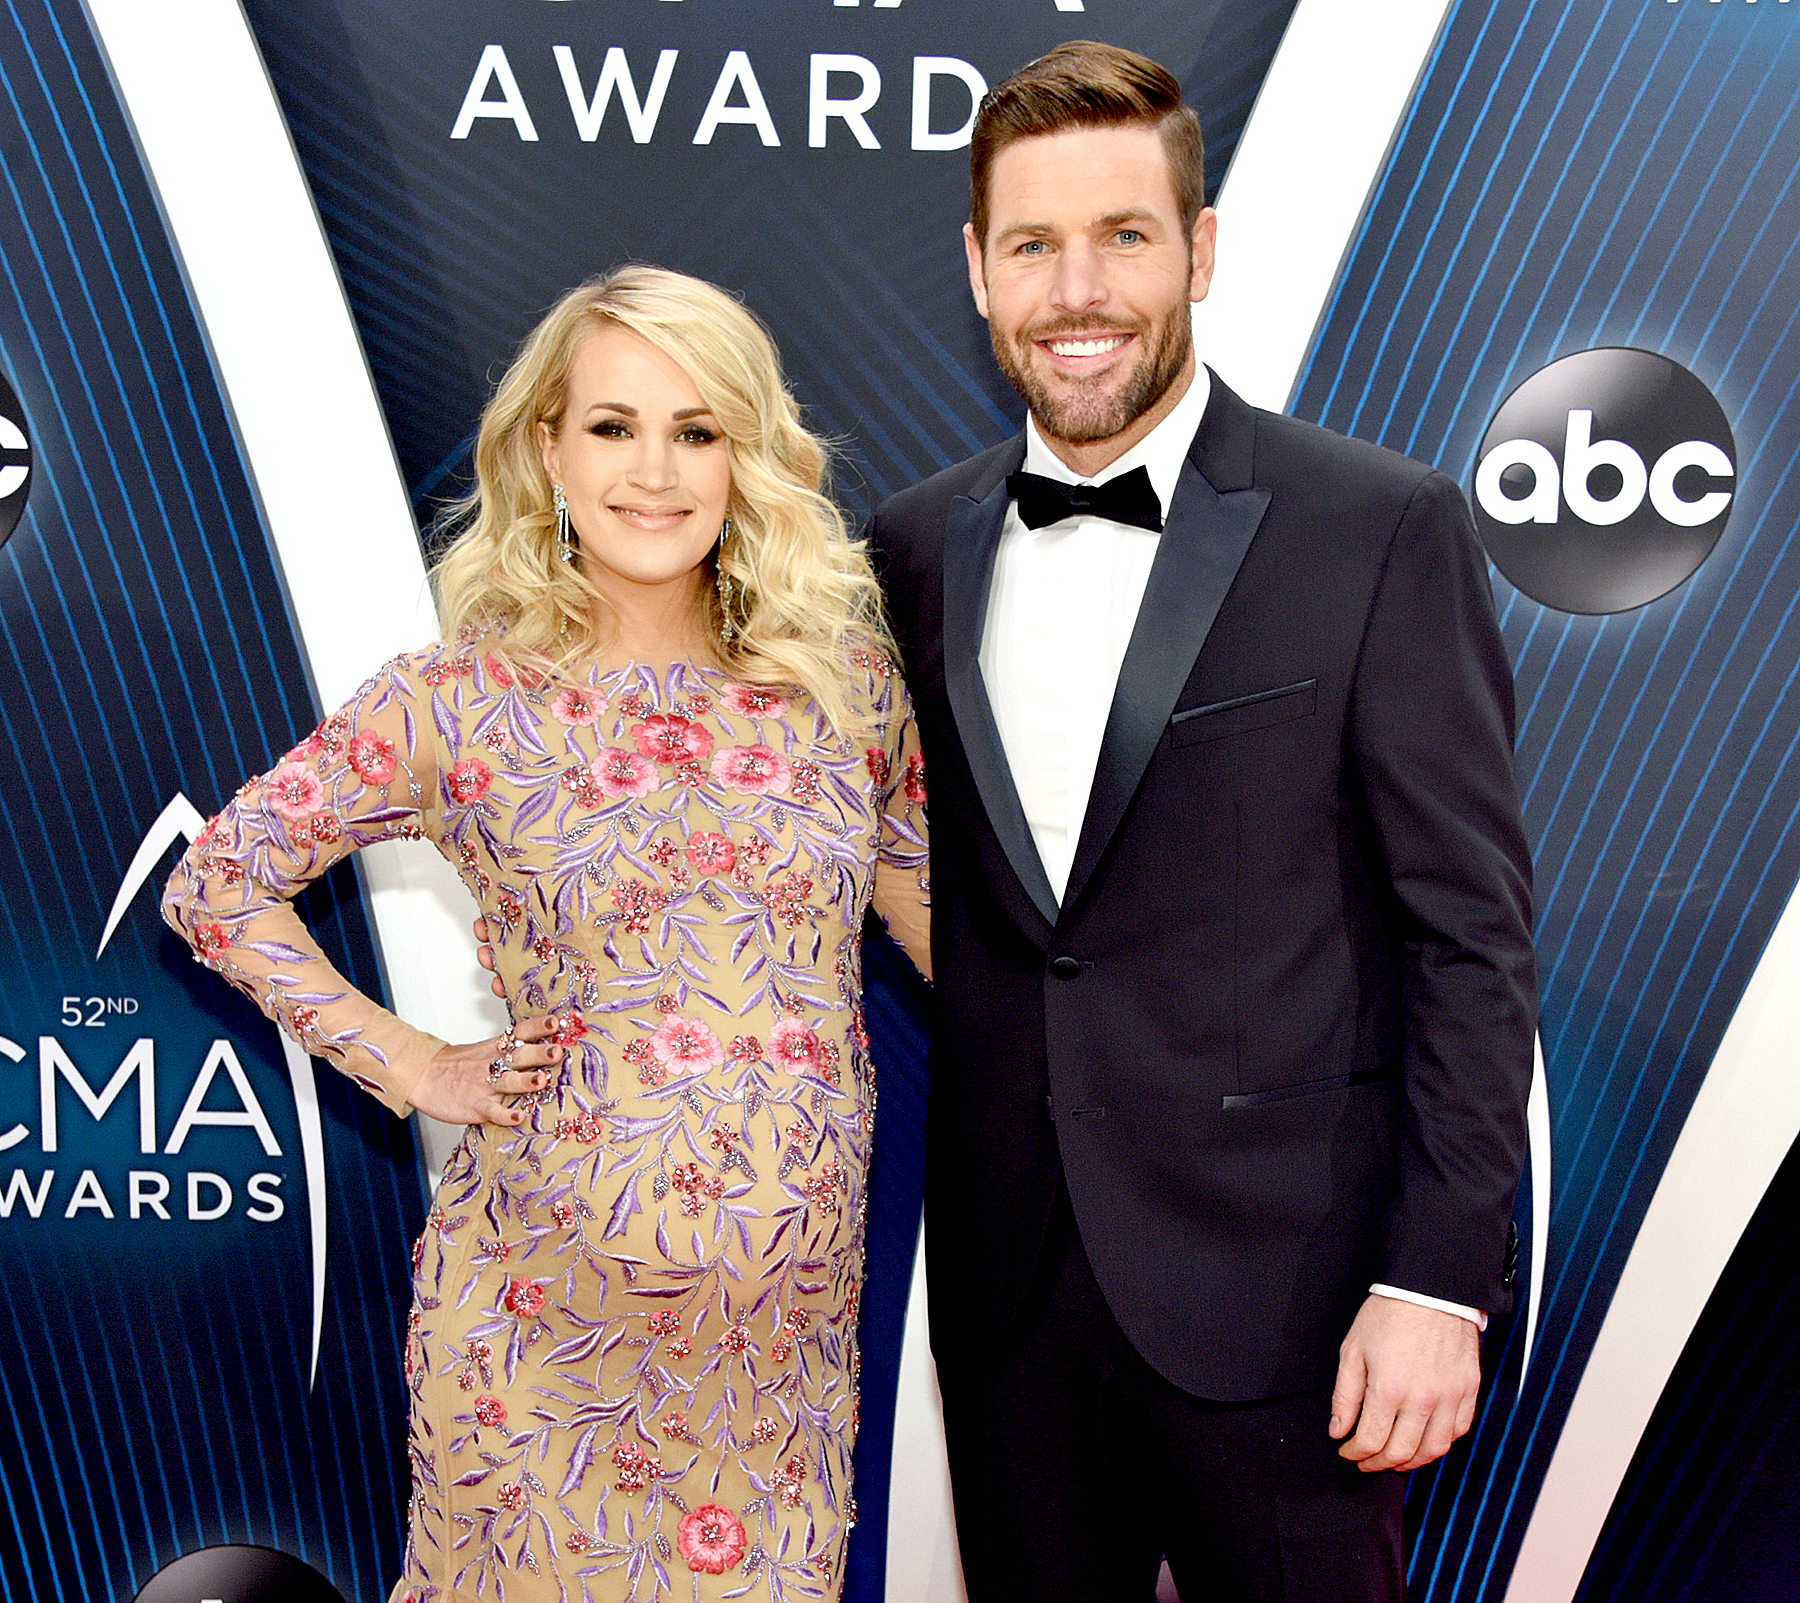 Pregnant Carrie Underwood Wearing Mike Fisher's Clothes, Hers Don